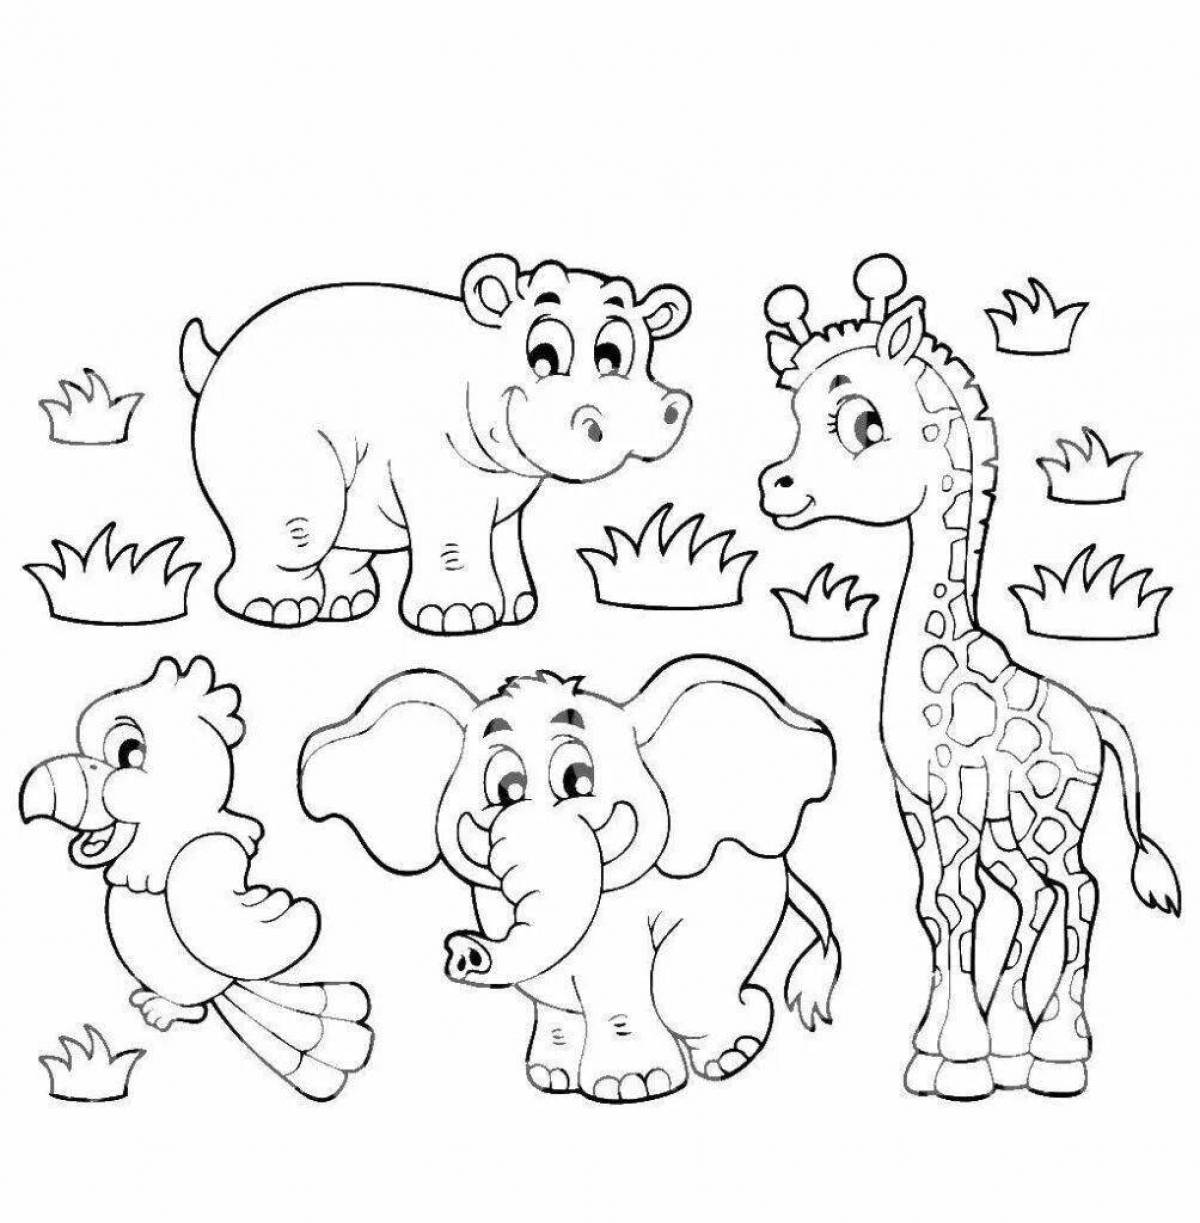 Fun coloring for children 7 years old animals of hot countries